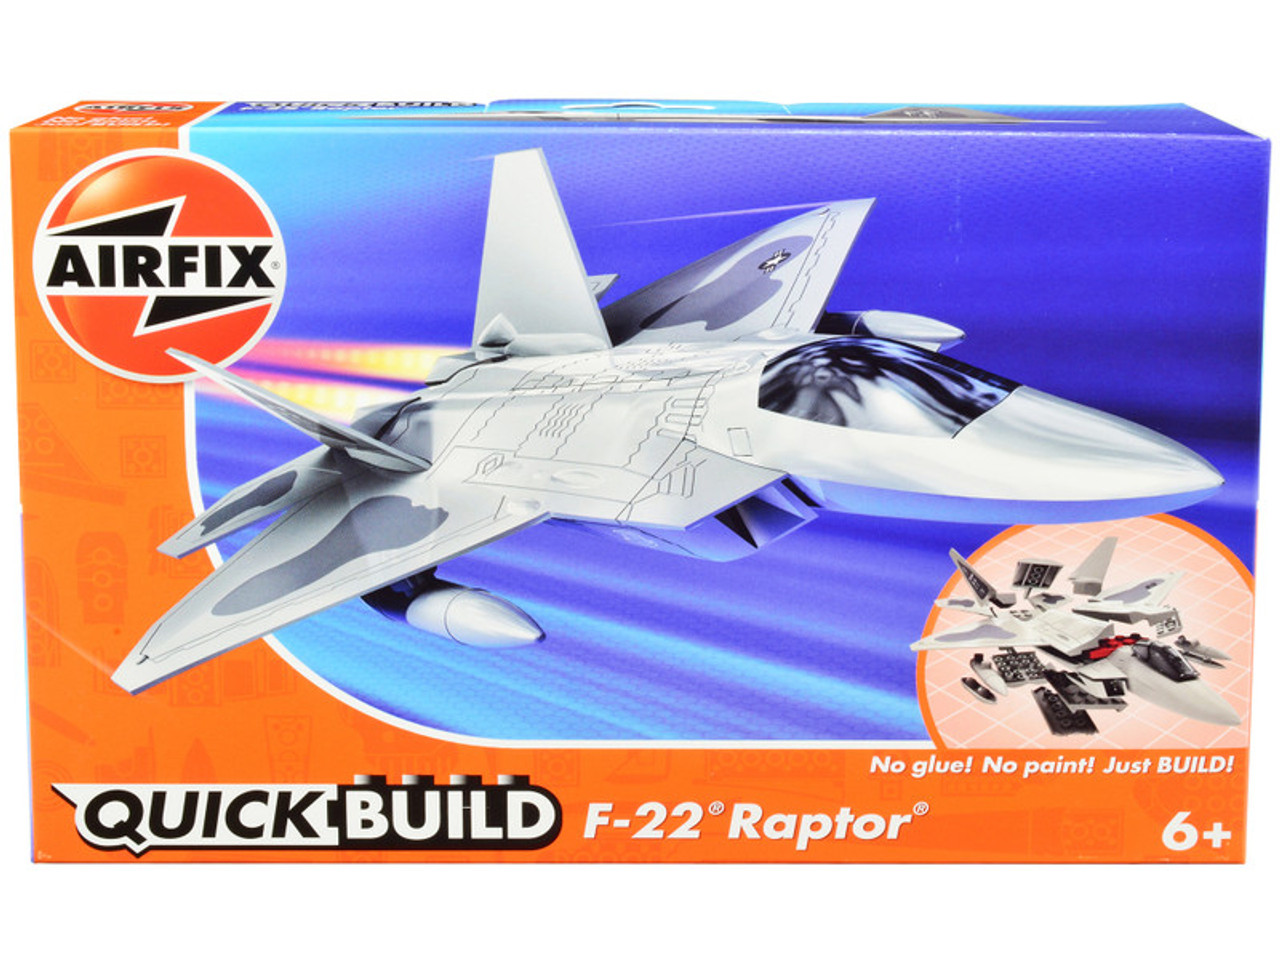 Skill 1 Model Kit F22 Raptor Snap Together Painted Plastic Model Airplane Kit by Airfix Quickbuild